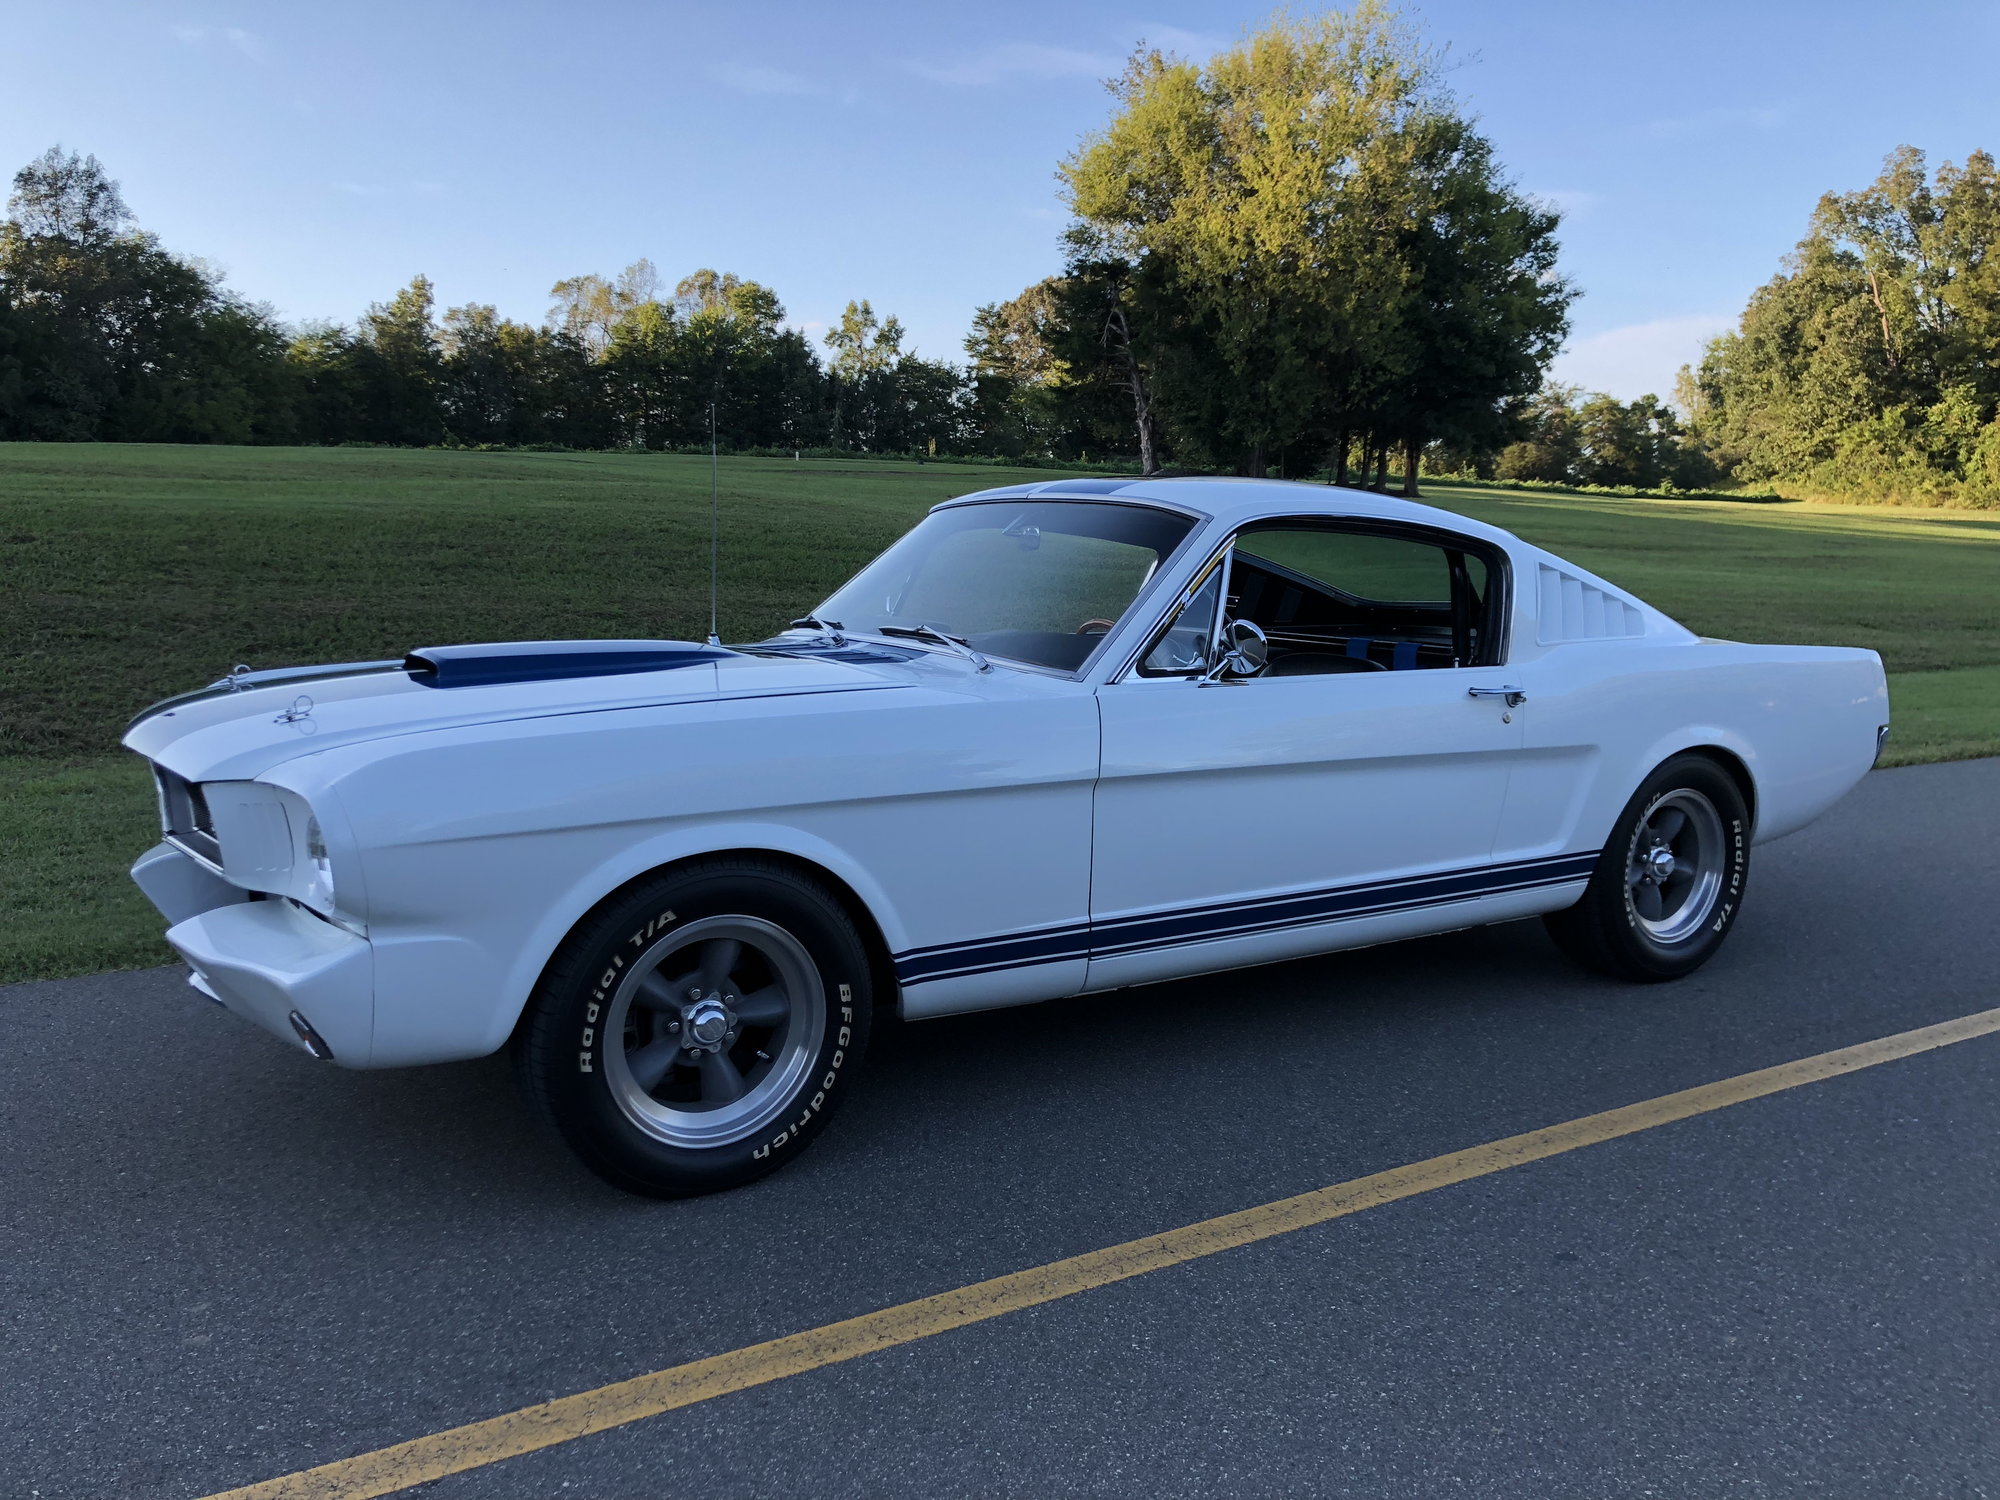 1965 Ford Mustang - Well built 1965 Mustang Fastback Restomod - Used - VIN 0000005F09A350495 - 8 cyl - 2WD - Manual - Coupe - White - Burlington, NC 27215, United States